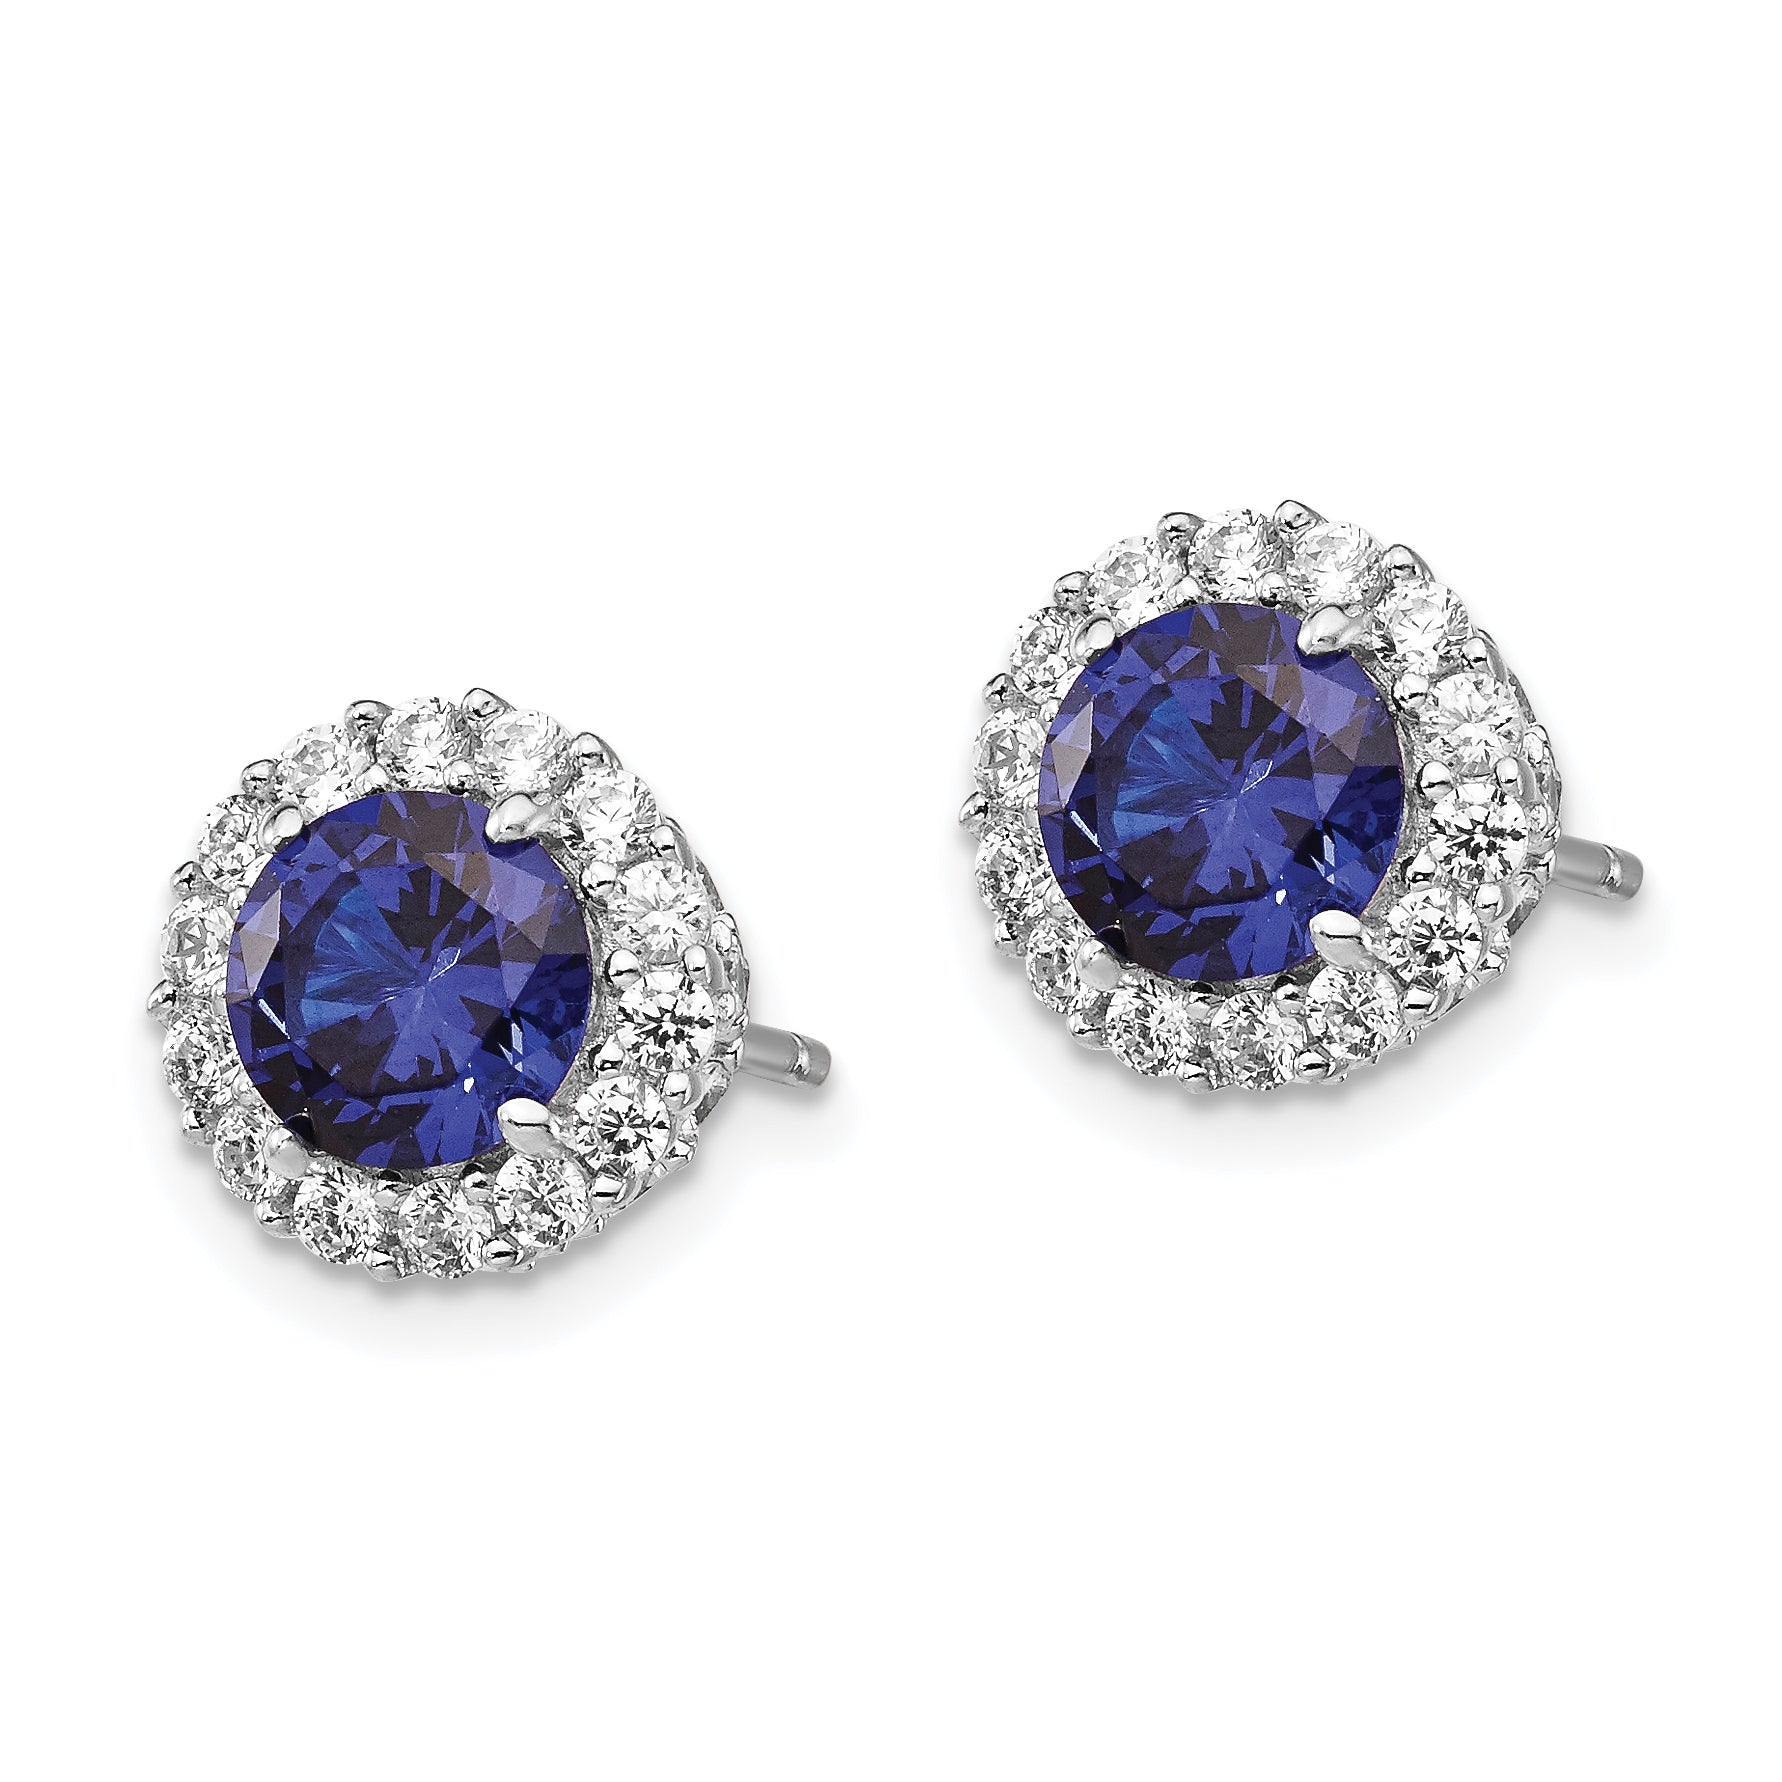 Cheryl M Sterling Silver Rhodium-plated Brilliant-cut Lab Created Dark Blue Spinel and Brilliant-cut White CZ Round Halo Post Earrings